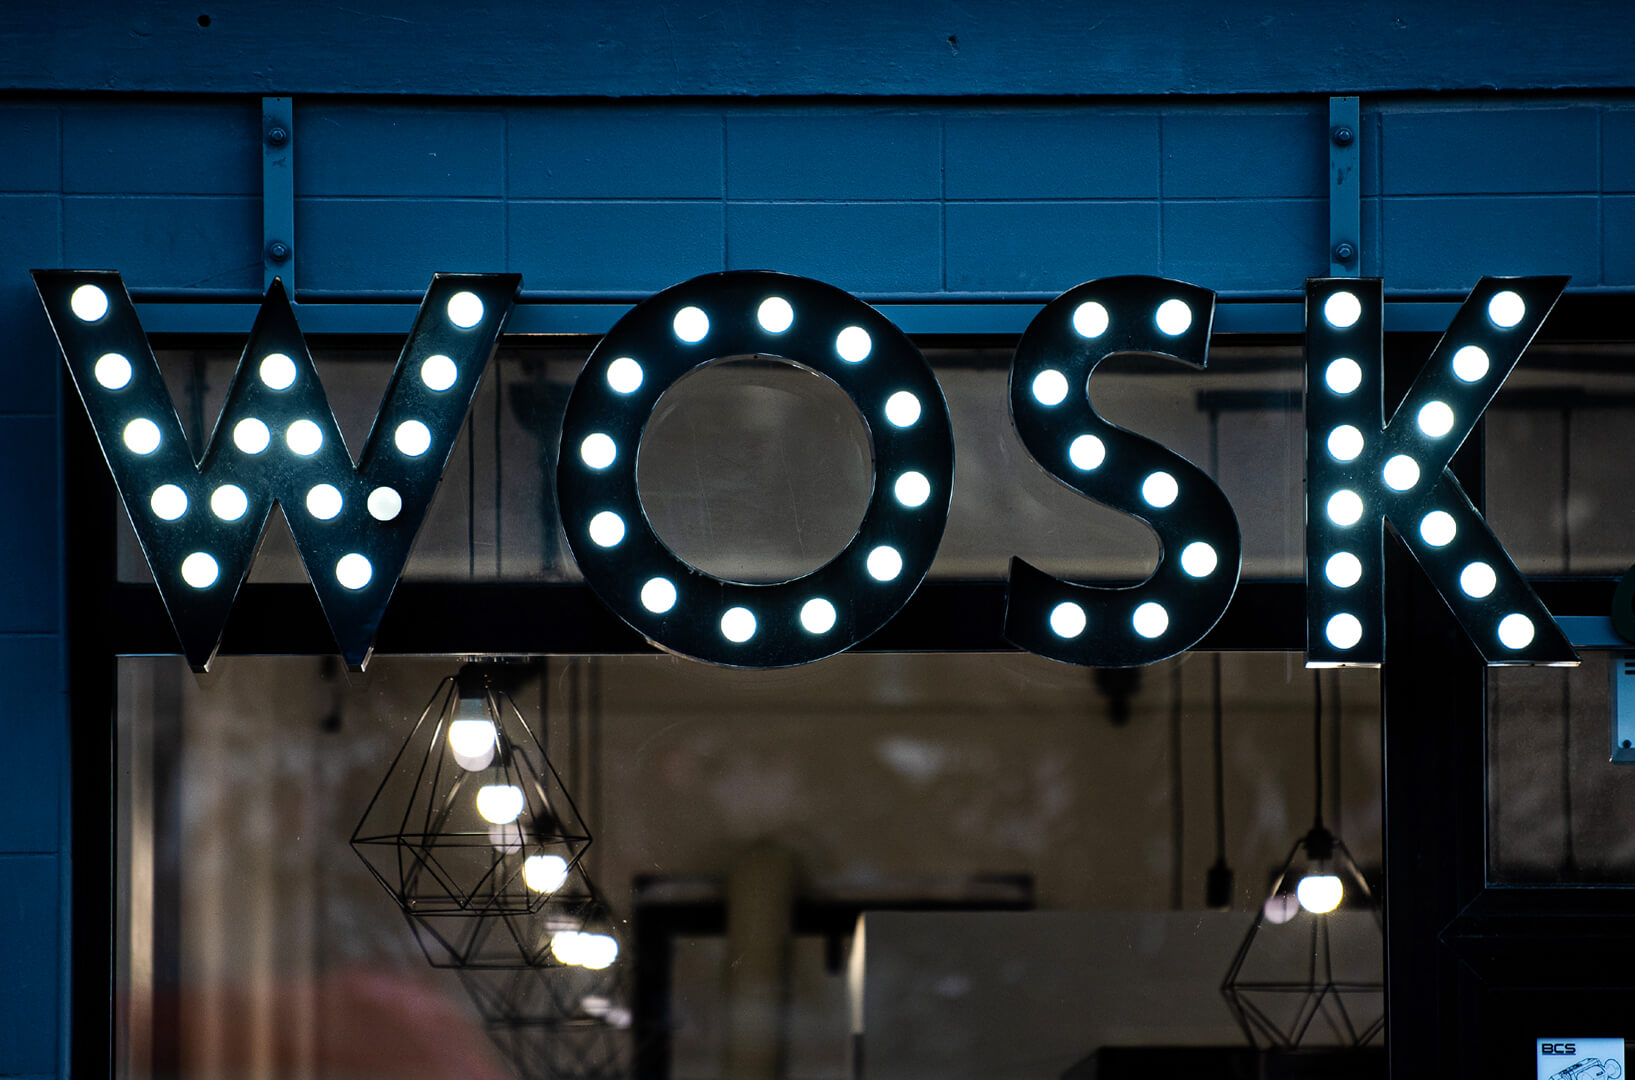 Wax - Letters with bulbs forming the word WOSK